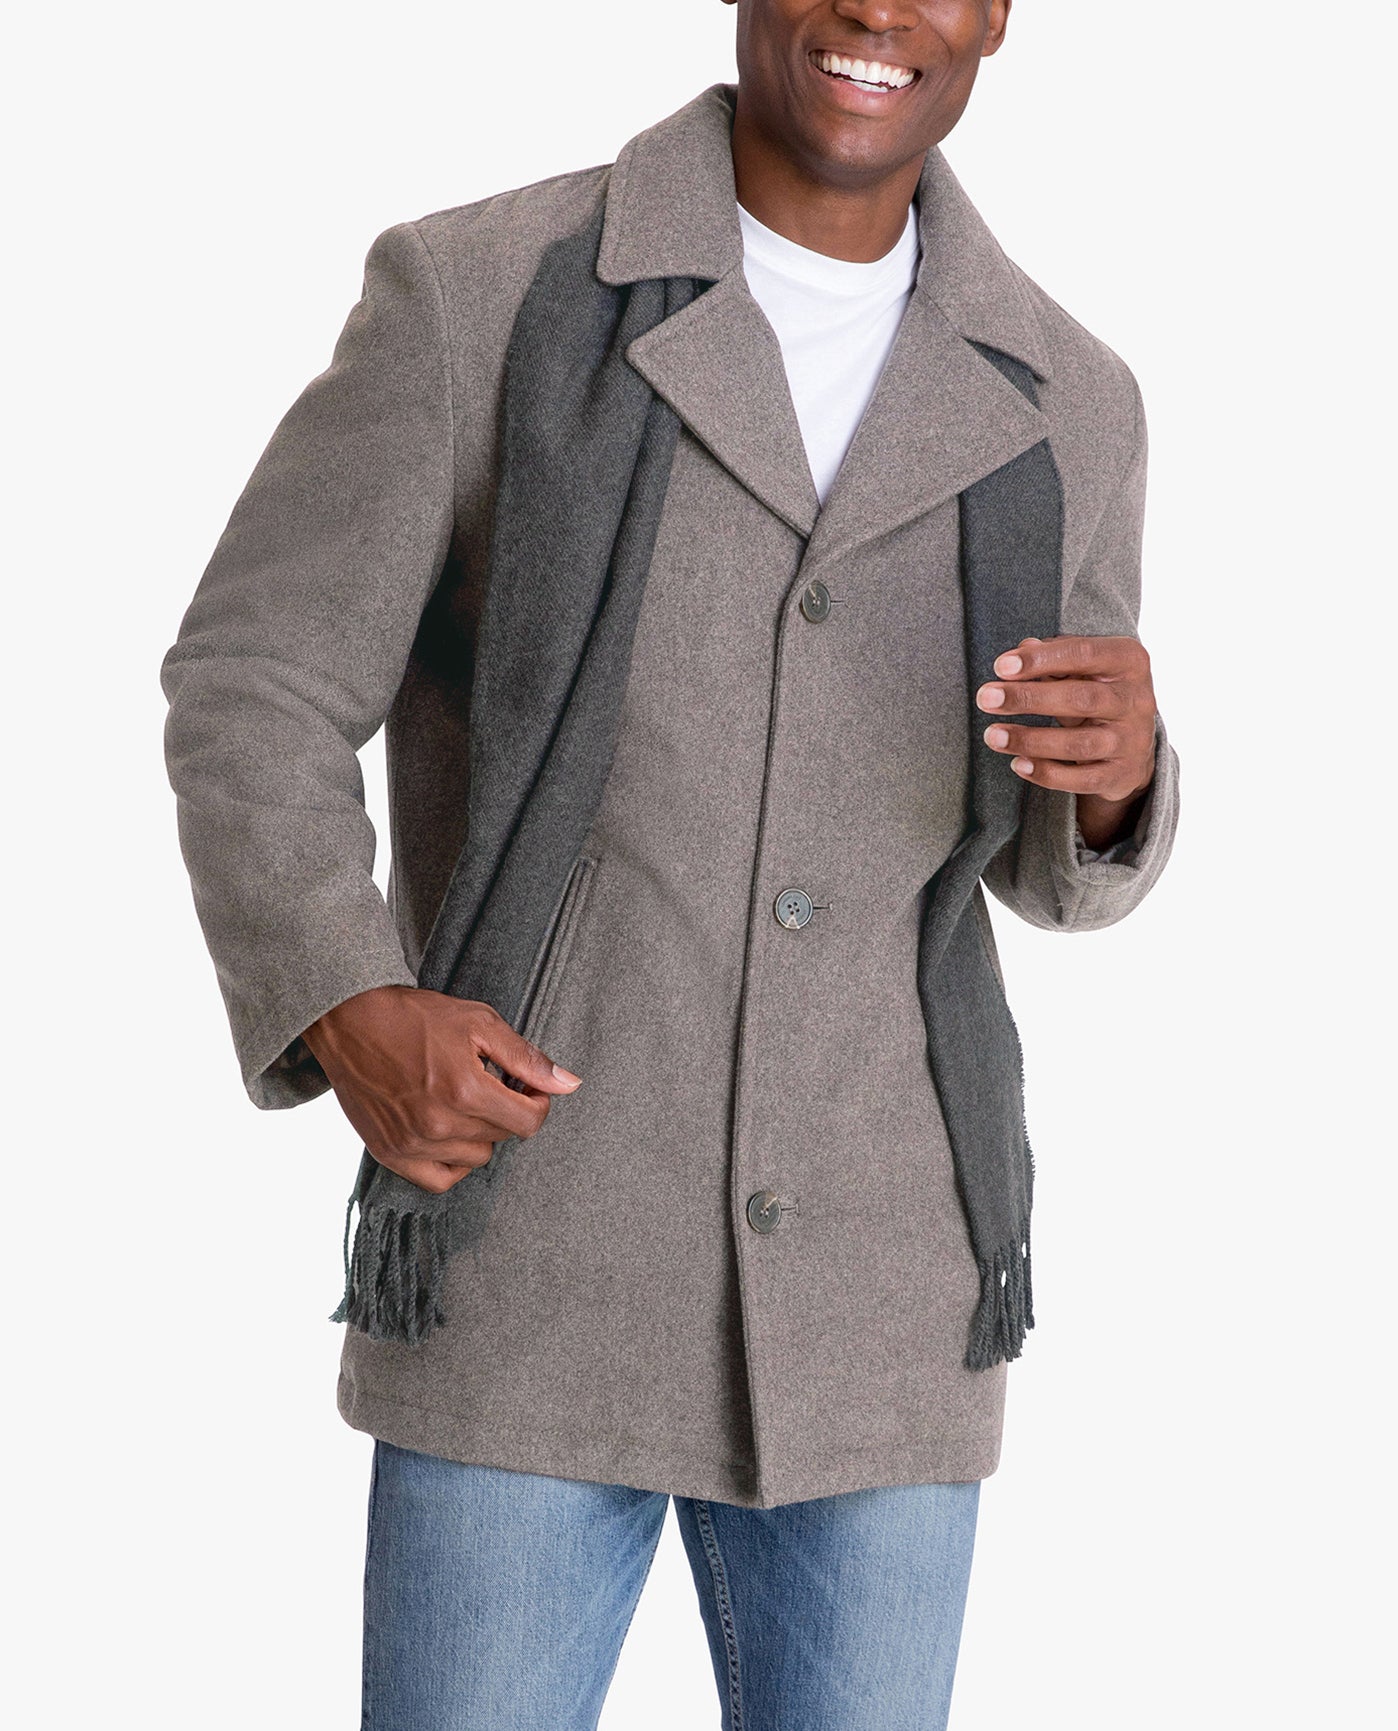 FRONT VIEW OF AMITY SINGLE BREASTED WOOL JACKET | MEDIUM GREY